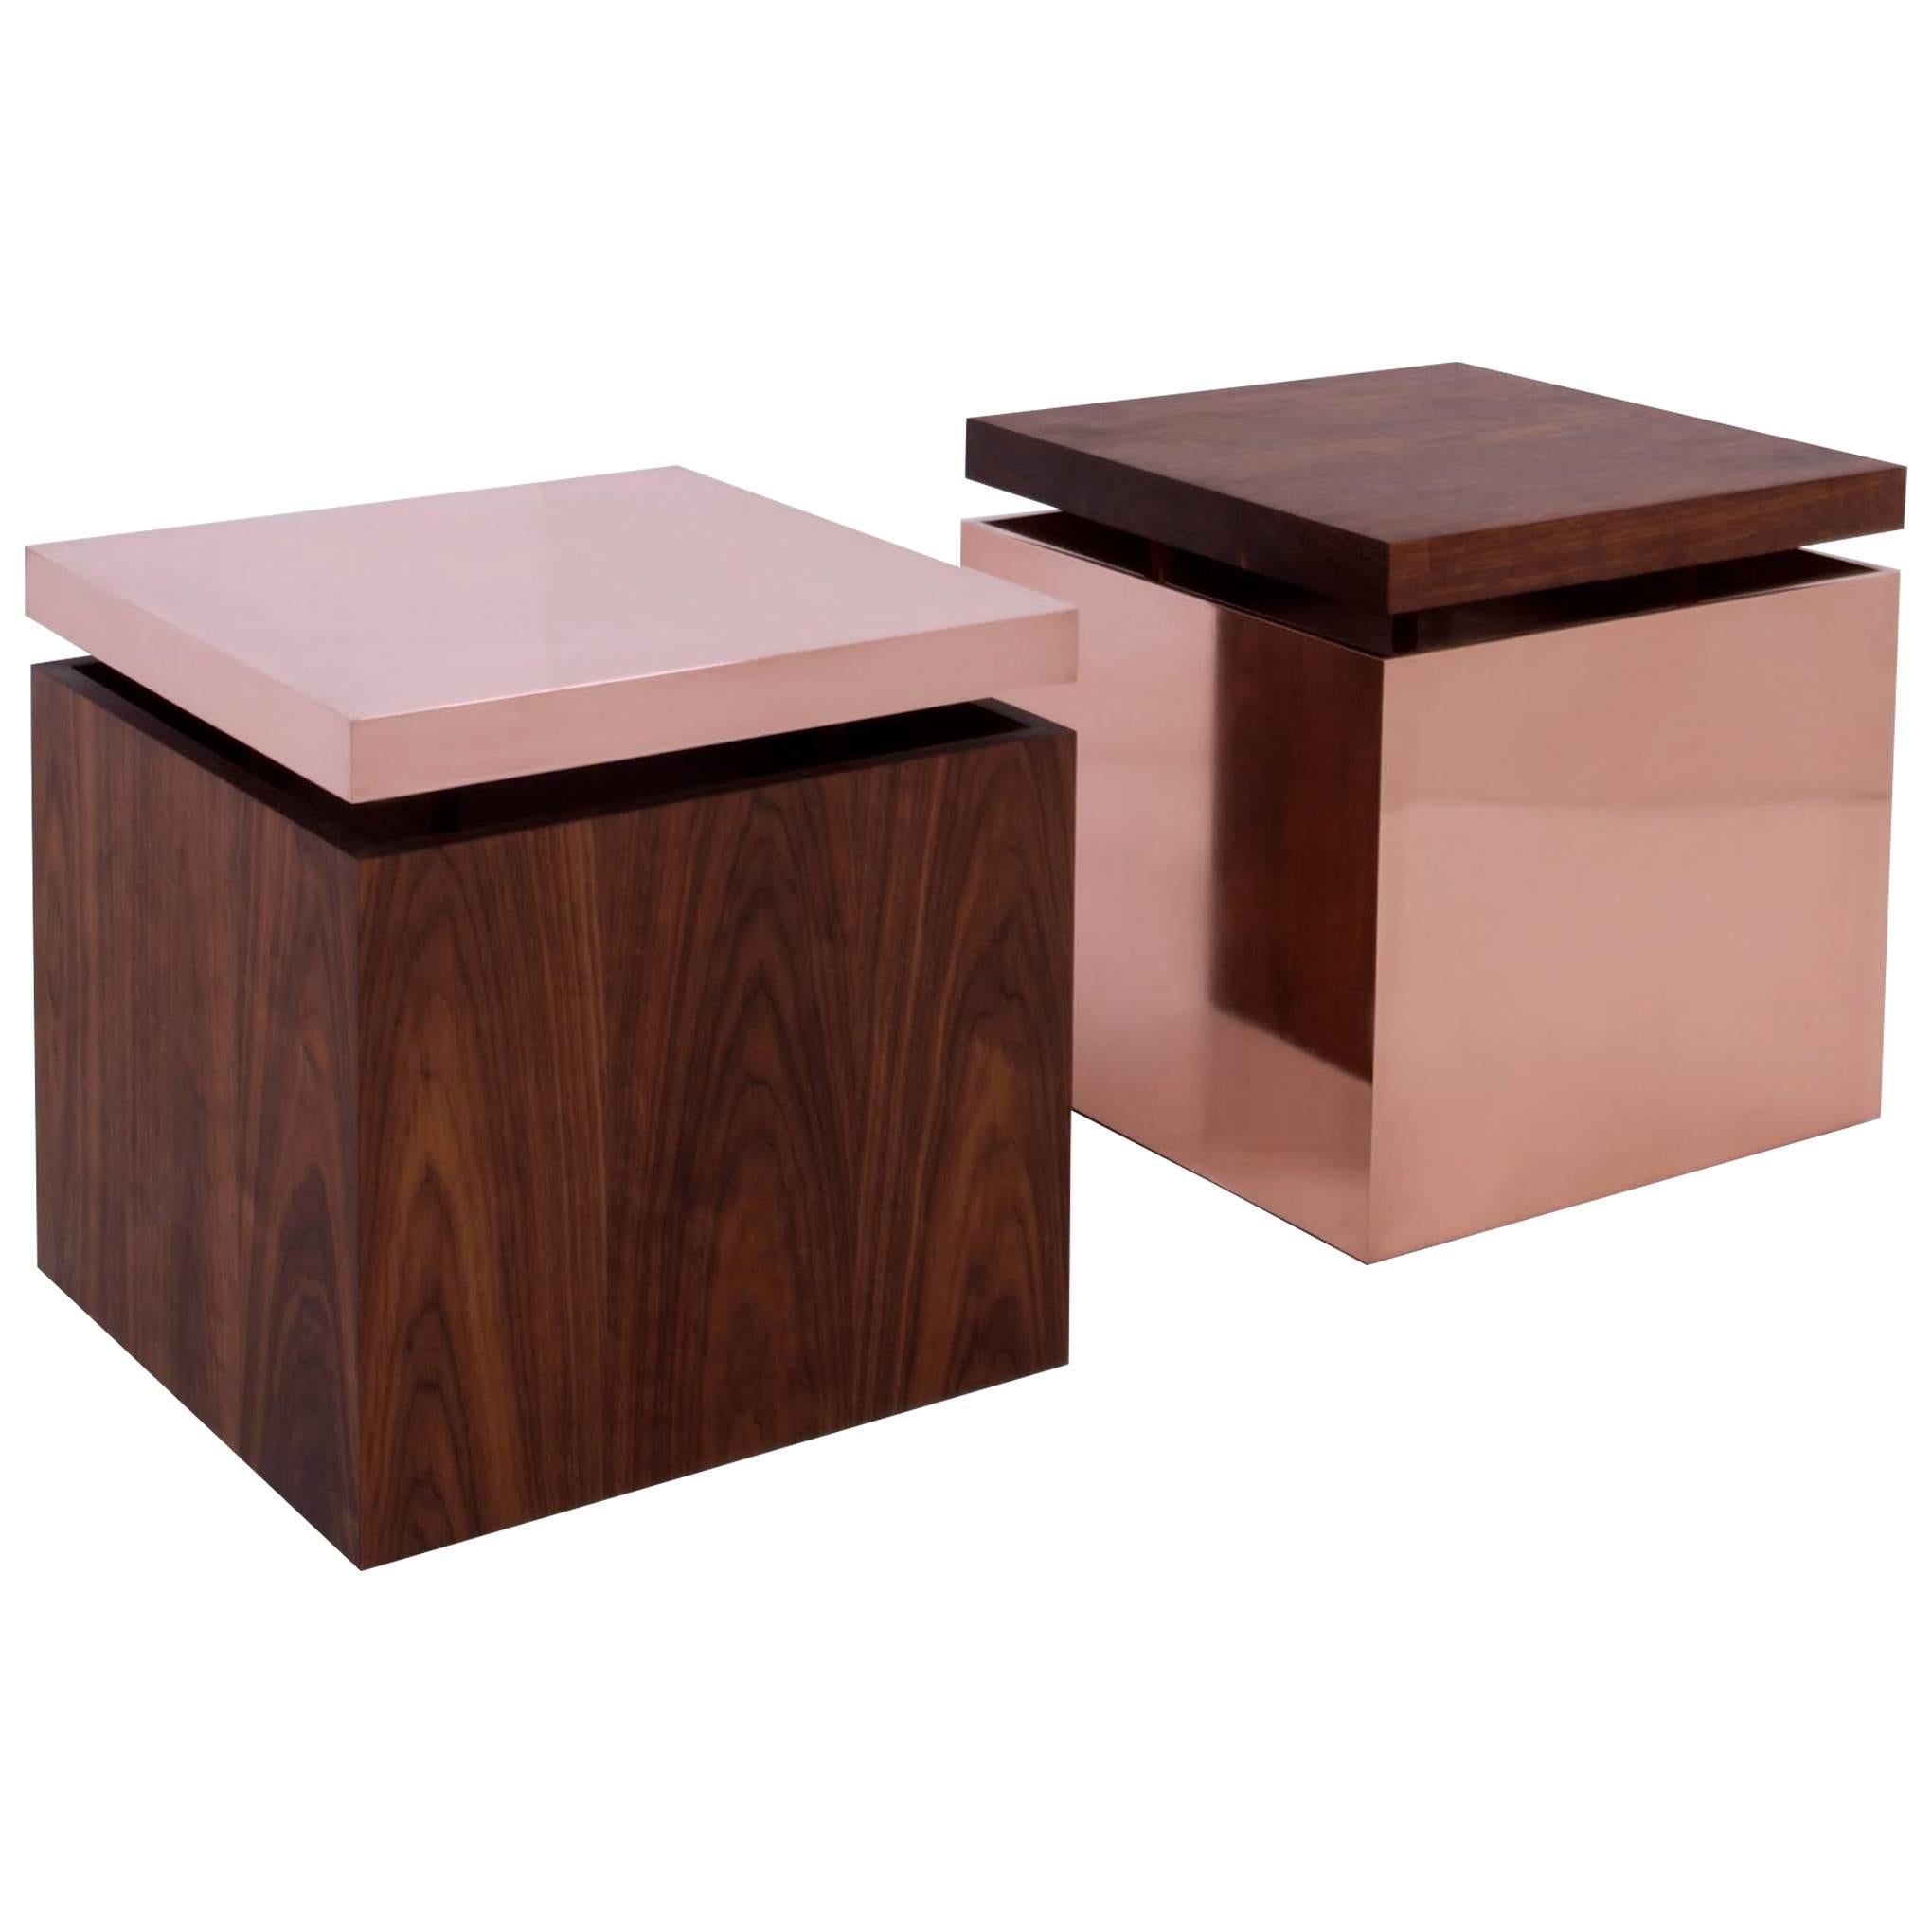 Pair of Contemporary Cube End Tables in Copper and Walnut by Brant Ritter For Sale